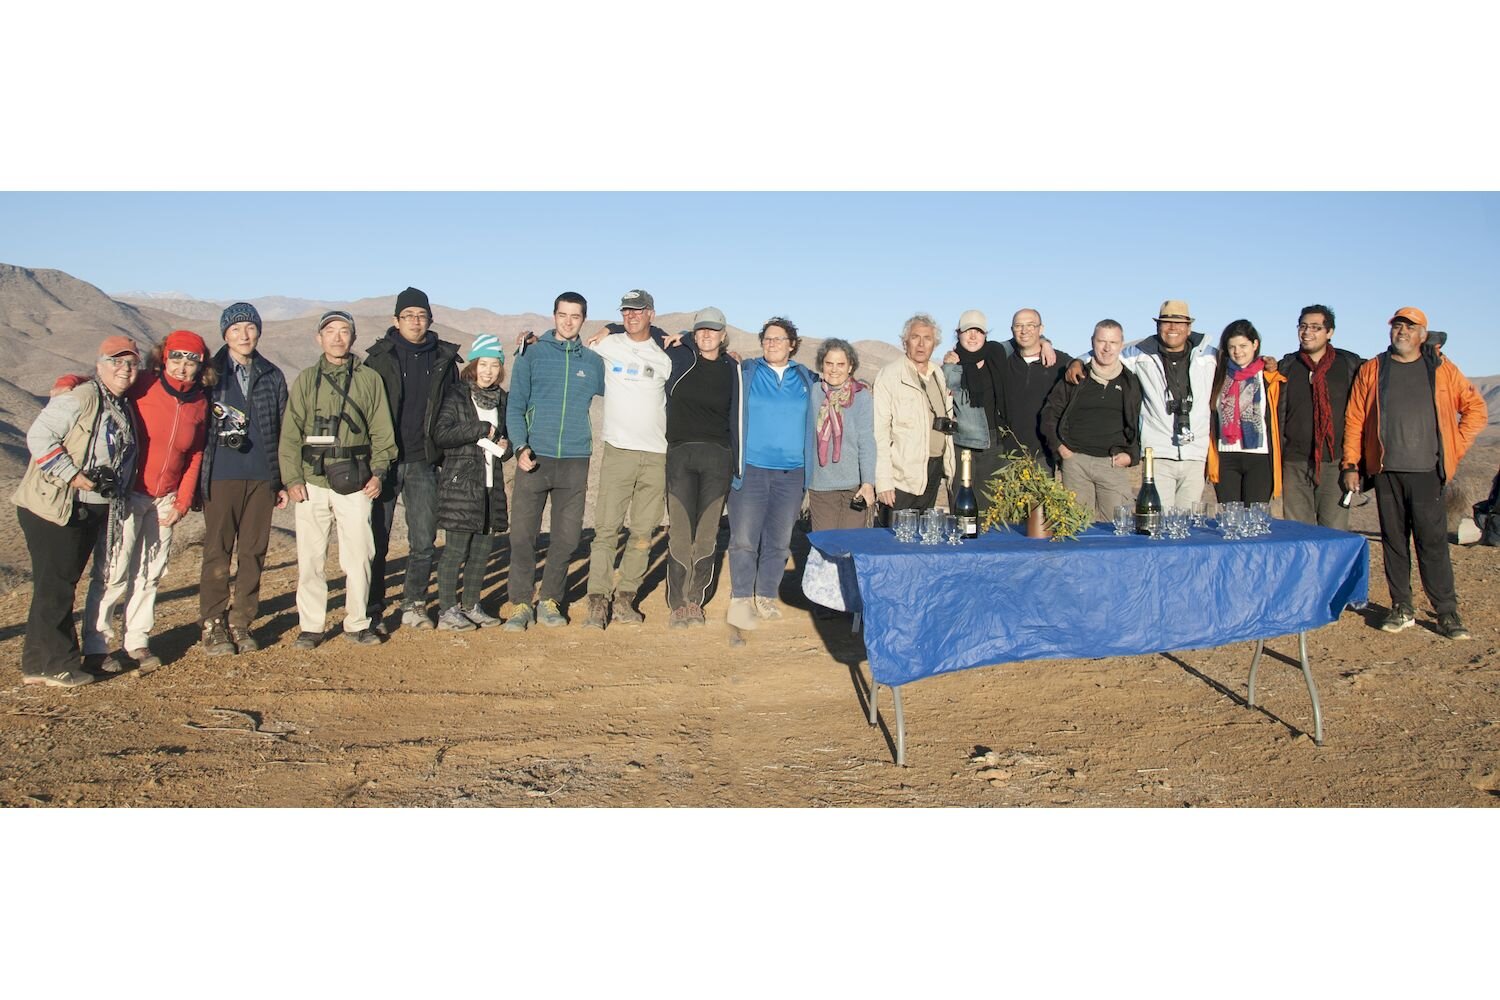 Expedition participants Solar Eclipse 2019 in the Atacama Desert in Chile